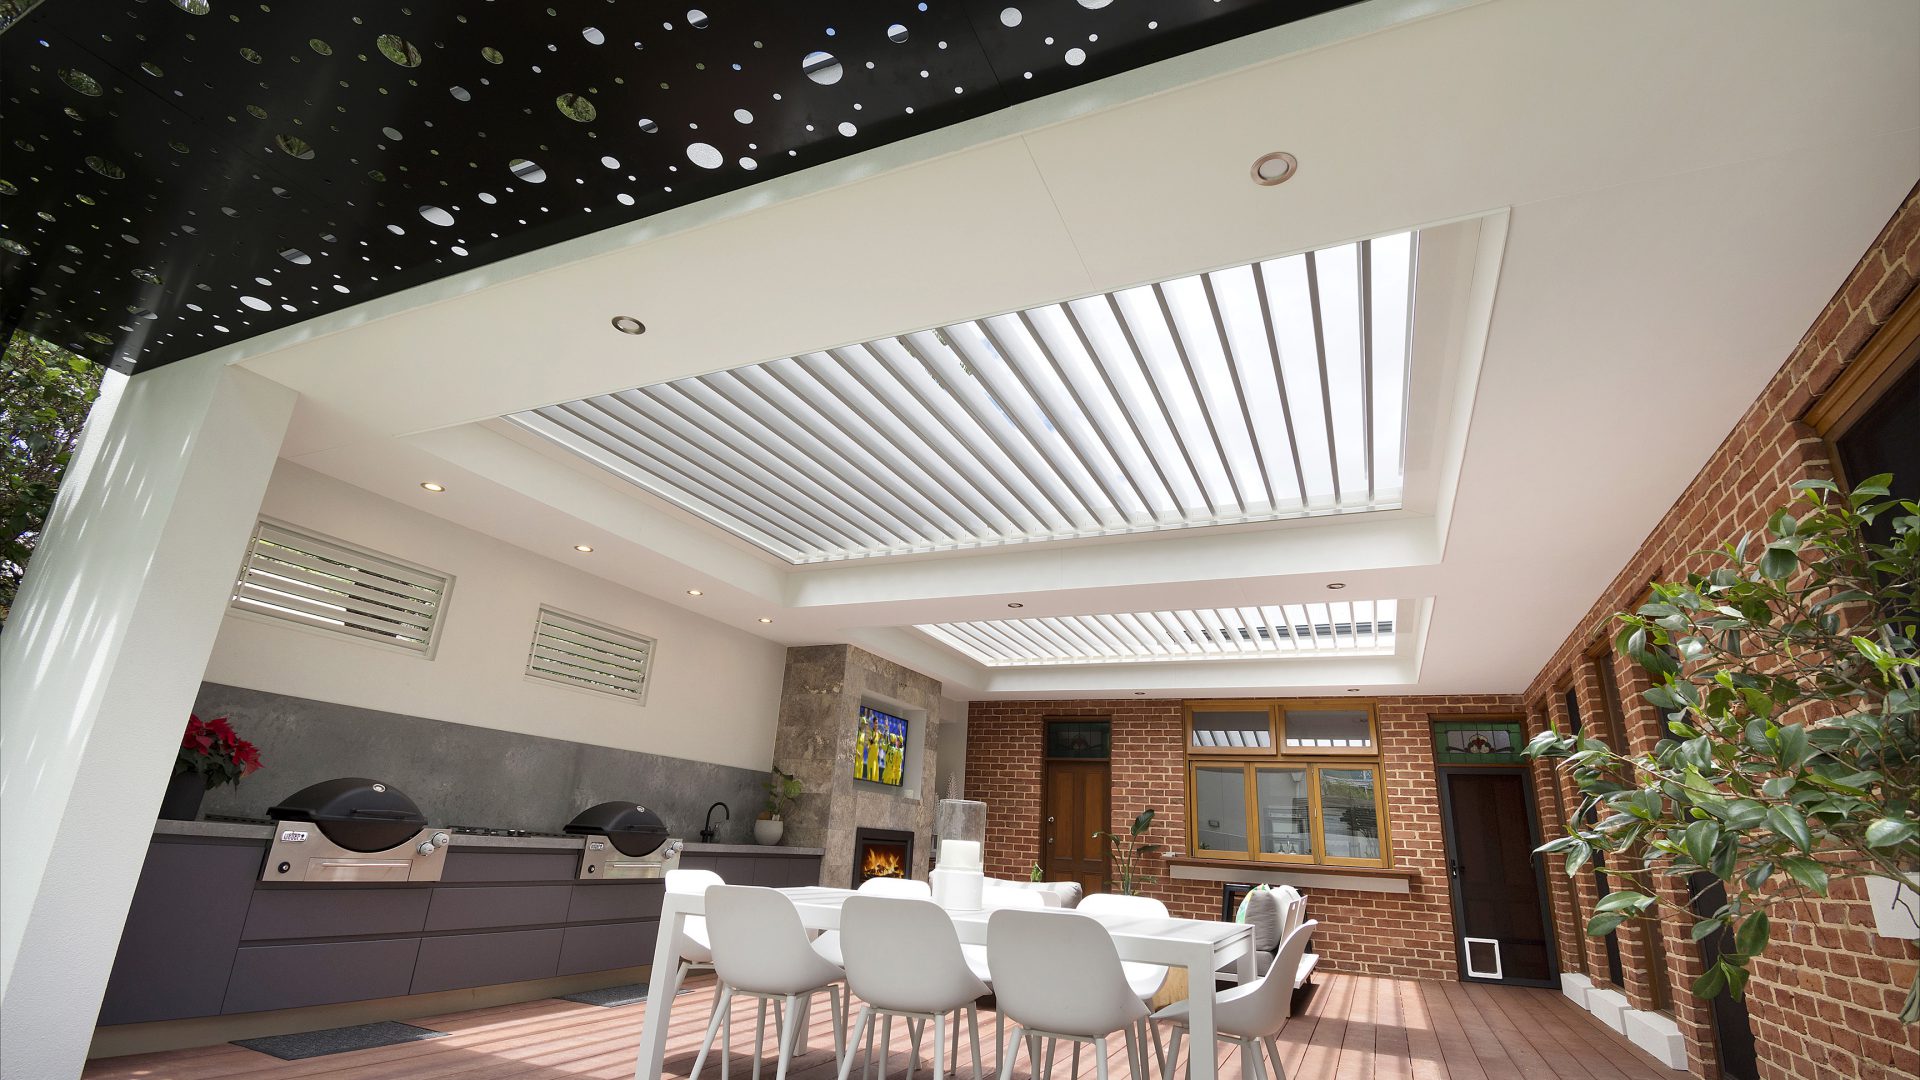 Creative Outddors Louvre Roof Pavilion in Unley